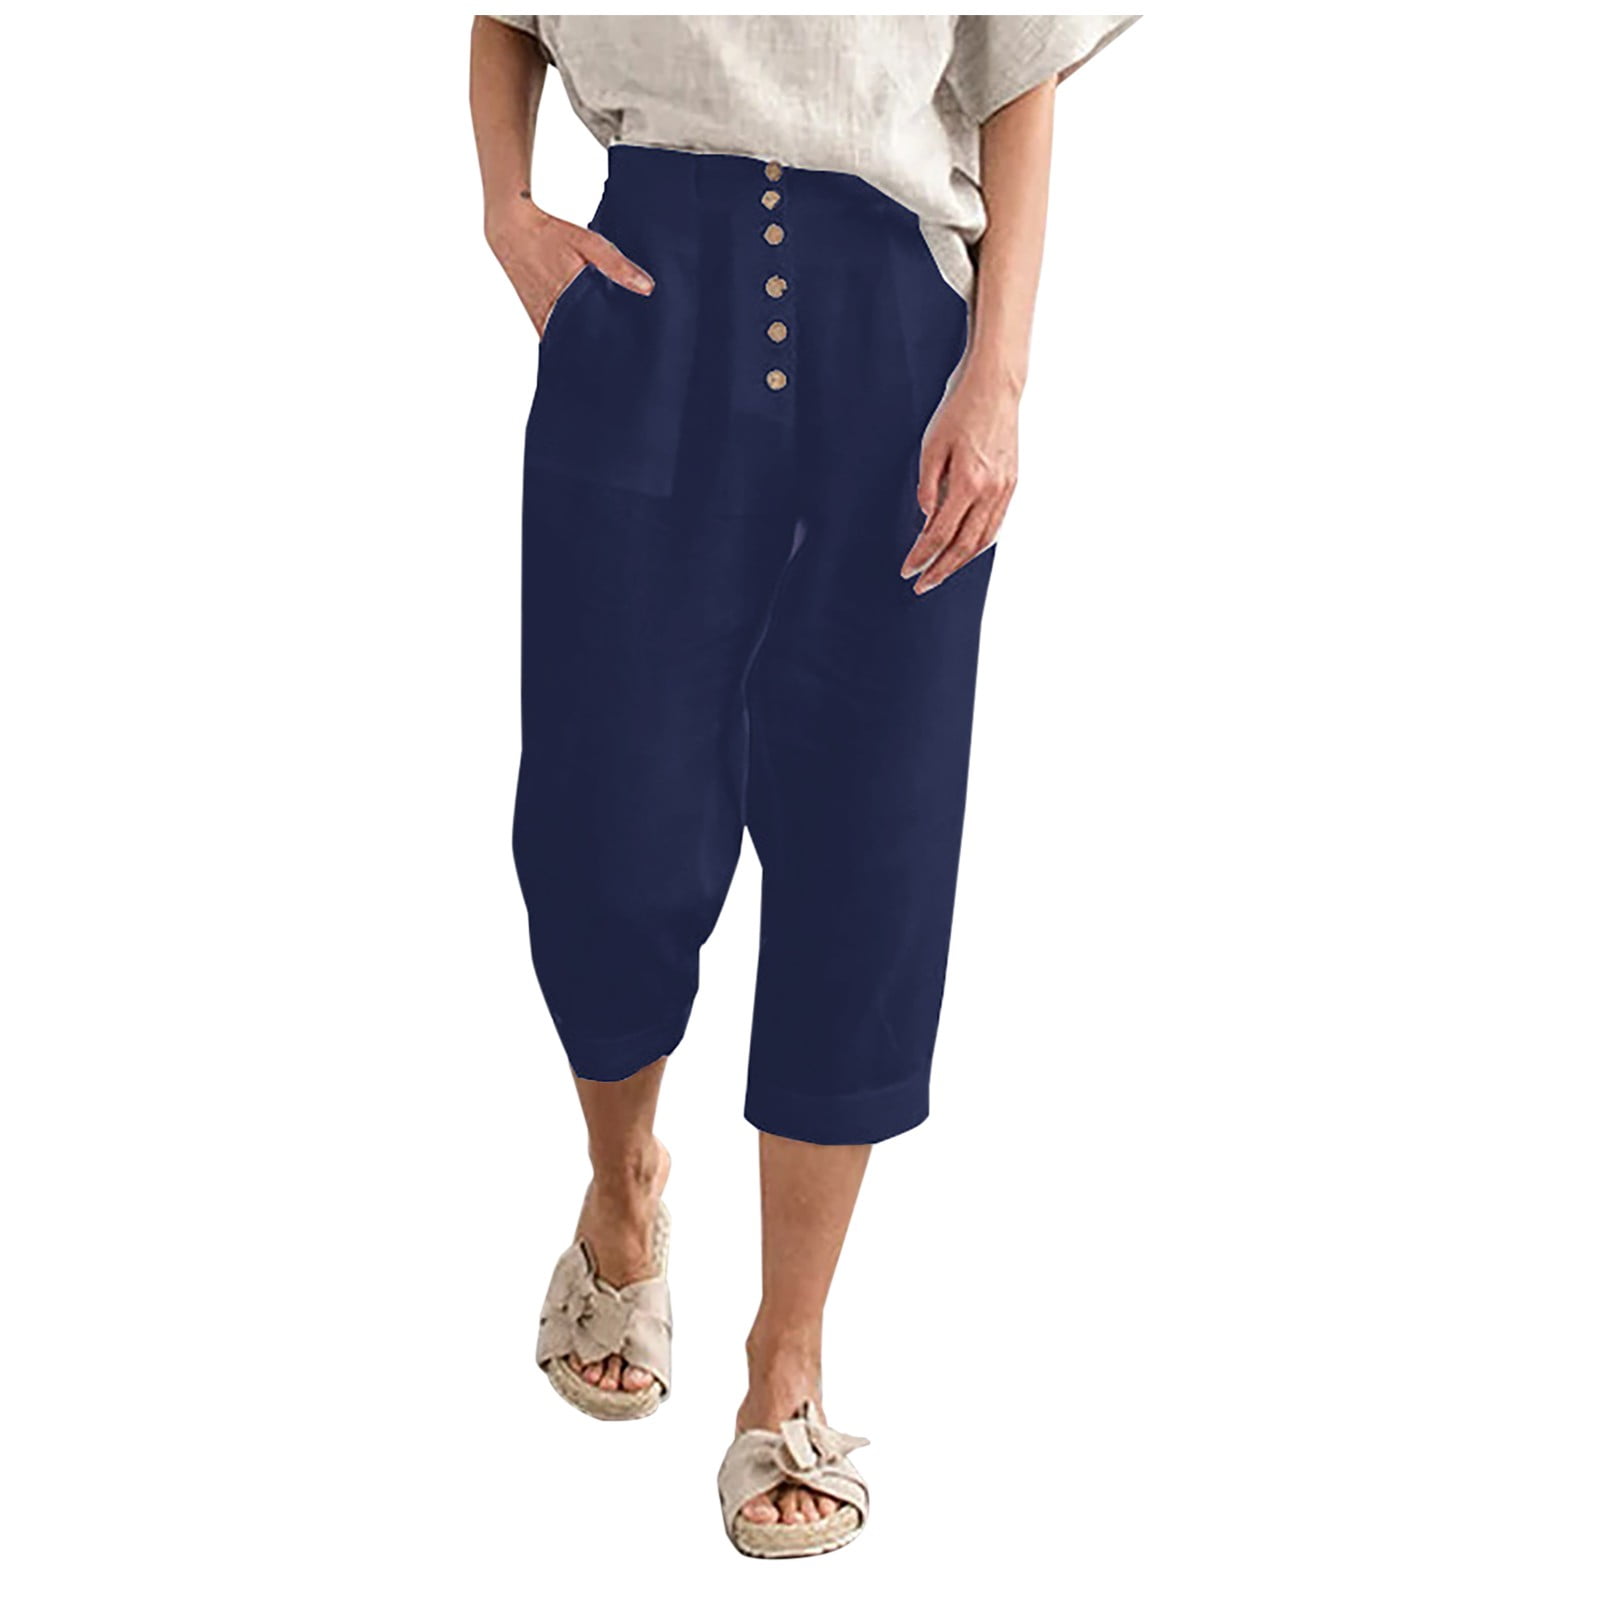 Casual High Waist Capri Pants for Women Solid Loose Cotton Linen Cropped  Leg Pants with Pockets Rolled Hem Lounge Pants(M,Navy) 